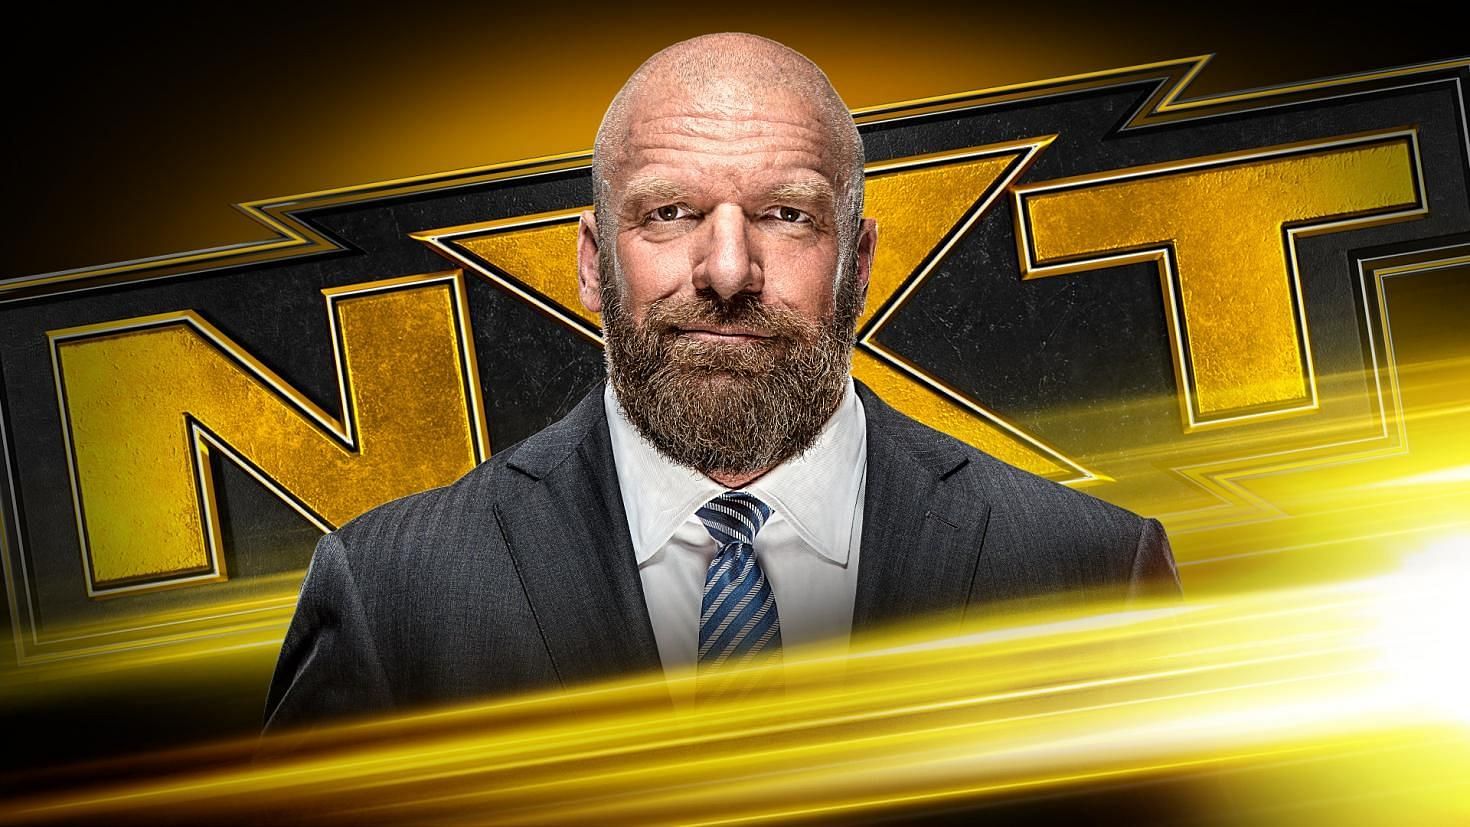 The Game loved the black-and-gold brand of WWE NXT